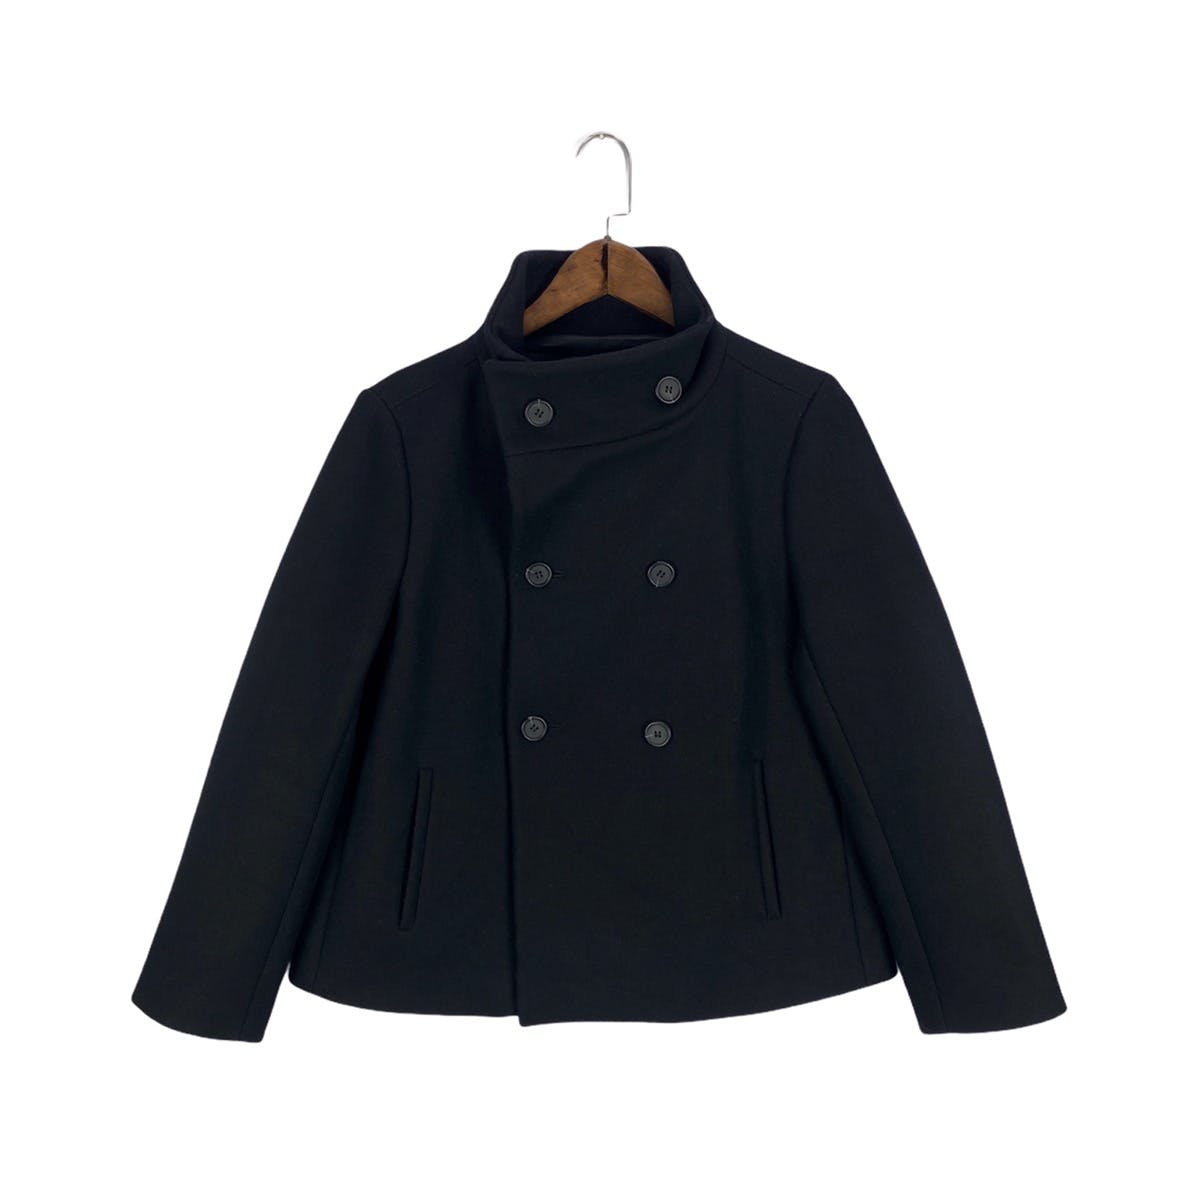 A.P.C Peacoat Wool Cropped Jacket Made In Poland - 1